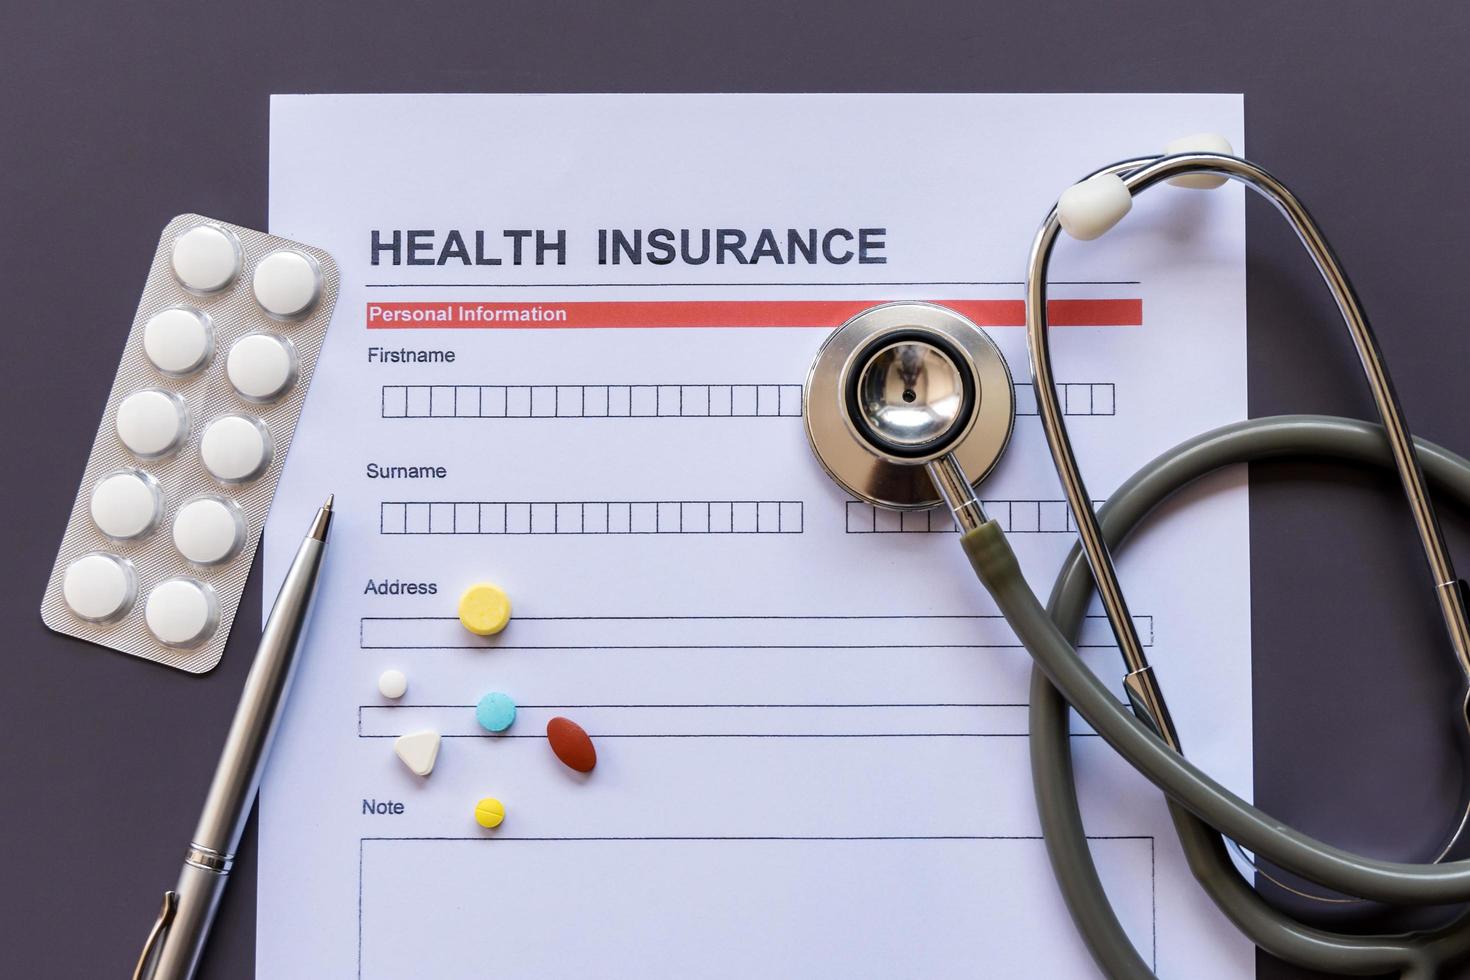 Health insurance form with model and policy document photo